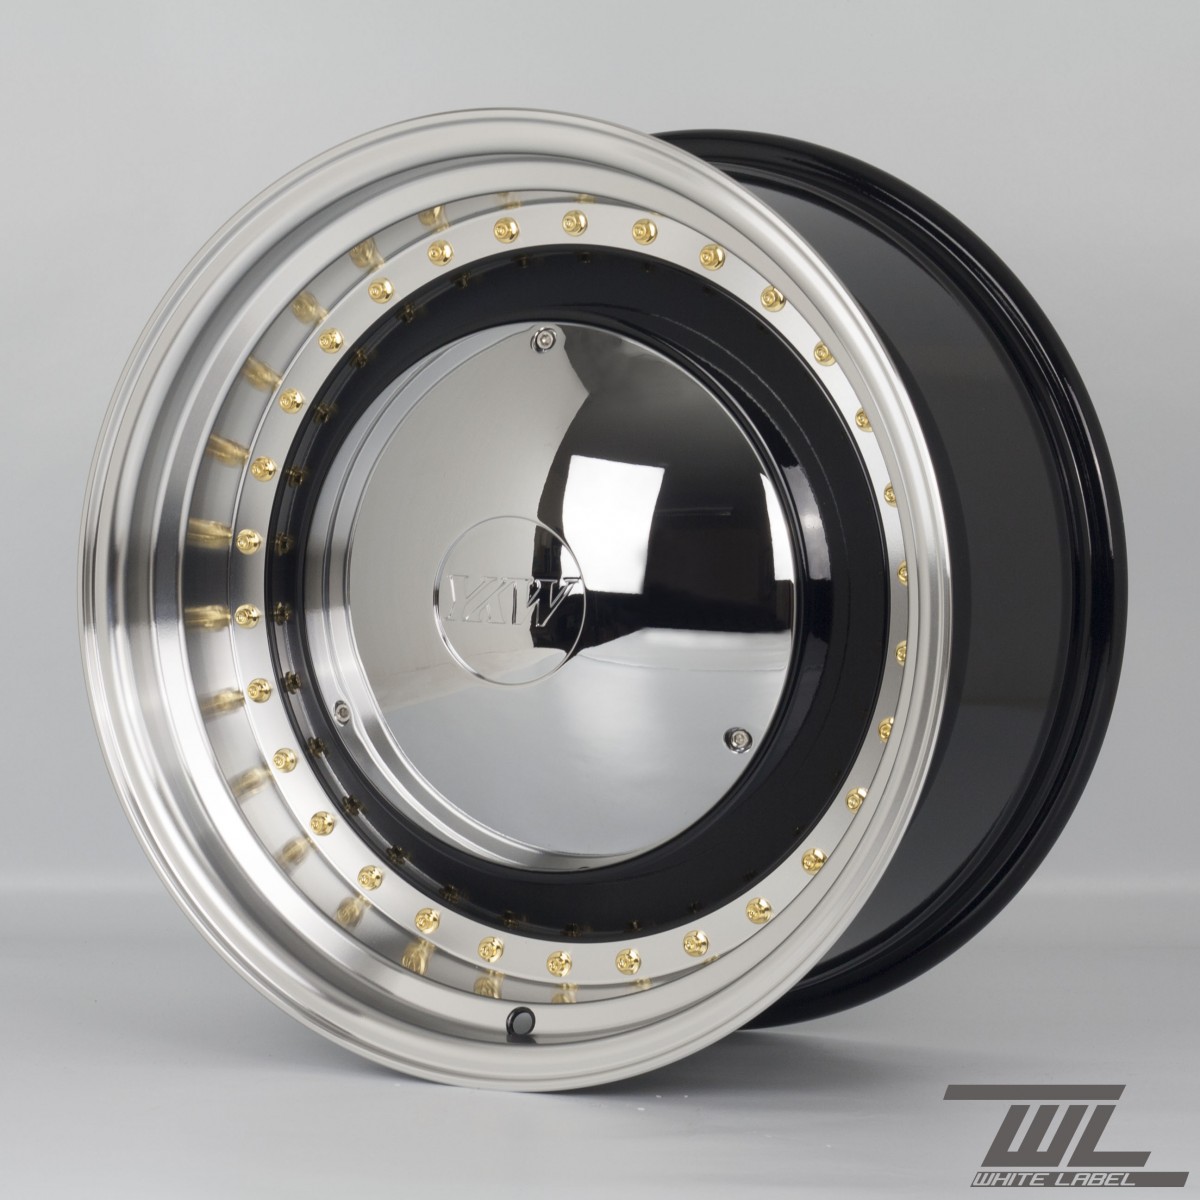 White Label YKW7708 Smoothie 17x7.5 and 17x8.5 5x112 Staggered Wheel Set in Black with Polished Lip and Chrome Hub Cap